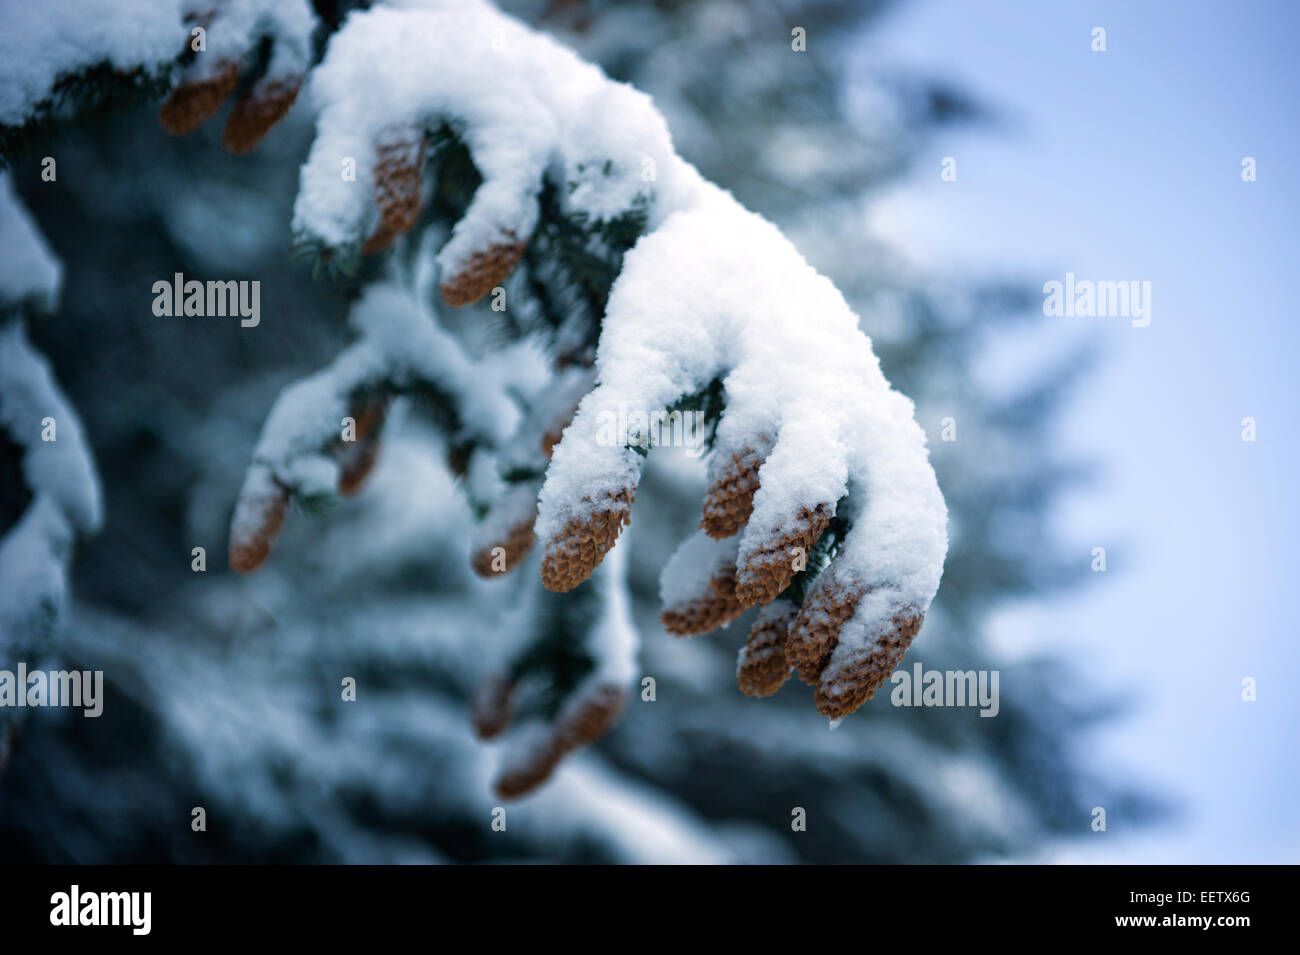 Strange claw like branches and conifer cones after heavy overnight snow showers Stock Photo